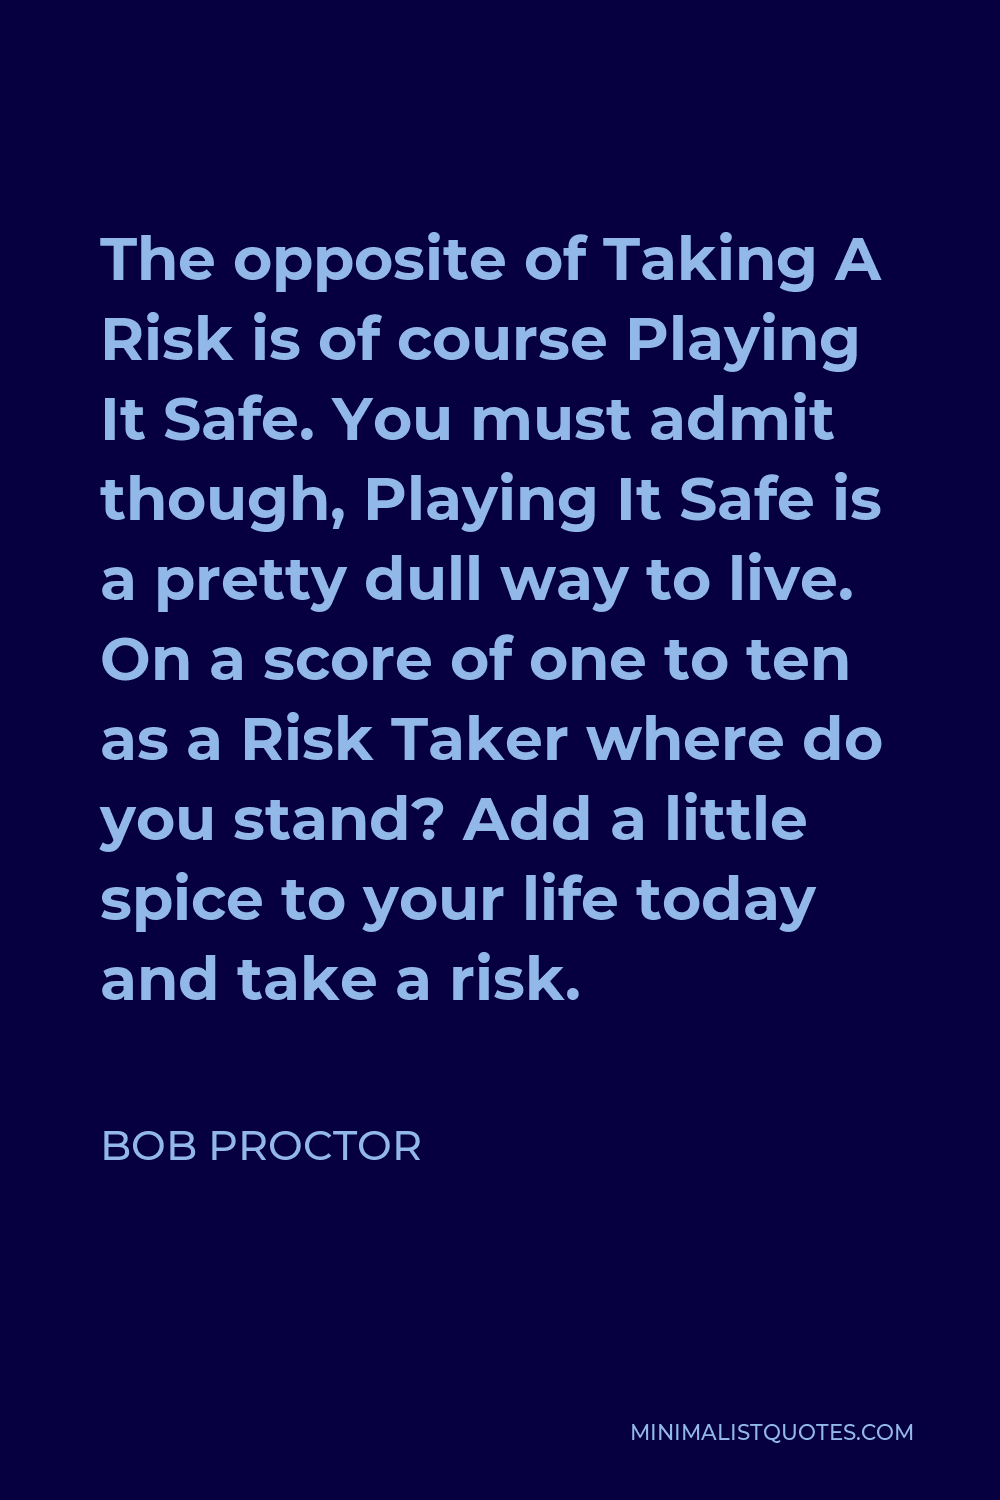 Bob Proctor Quote - The opposite of Taking A Risk is of course Playing It Safe. You must admit though, Playing It Safe is a pretty dull way to live. On a score of one to ten as a Risk Taker where do you stand? Add a little spice to your life today and take a risk.